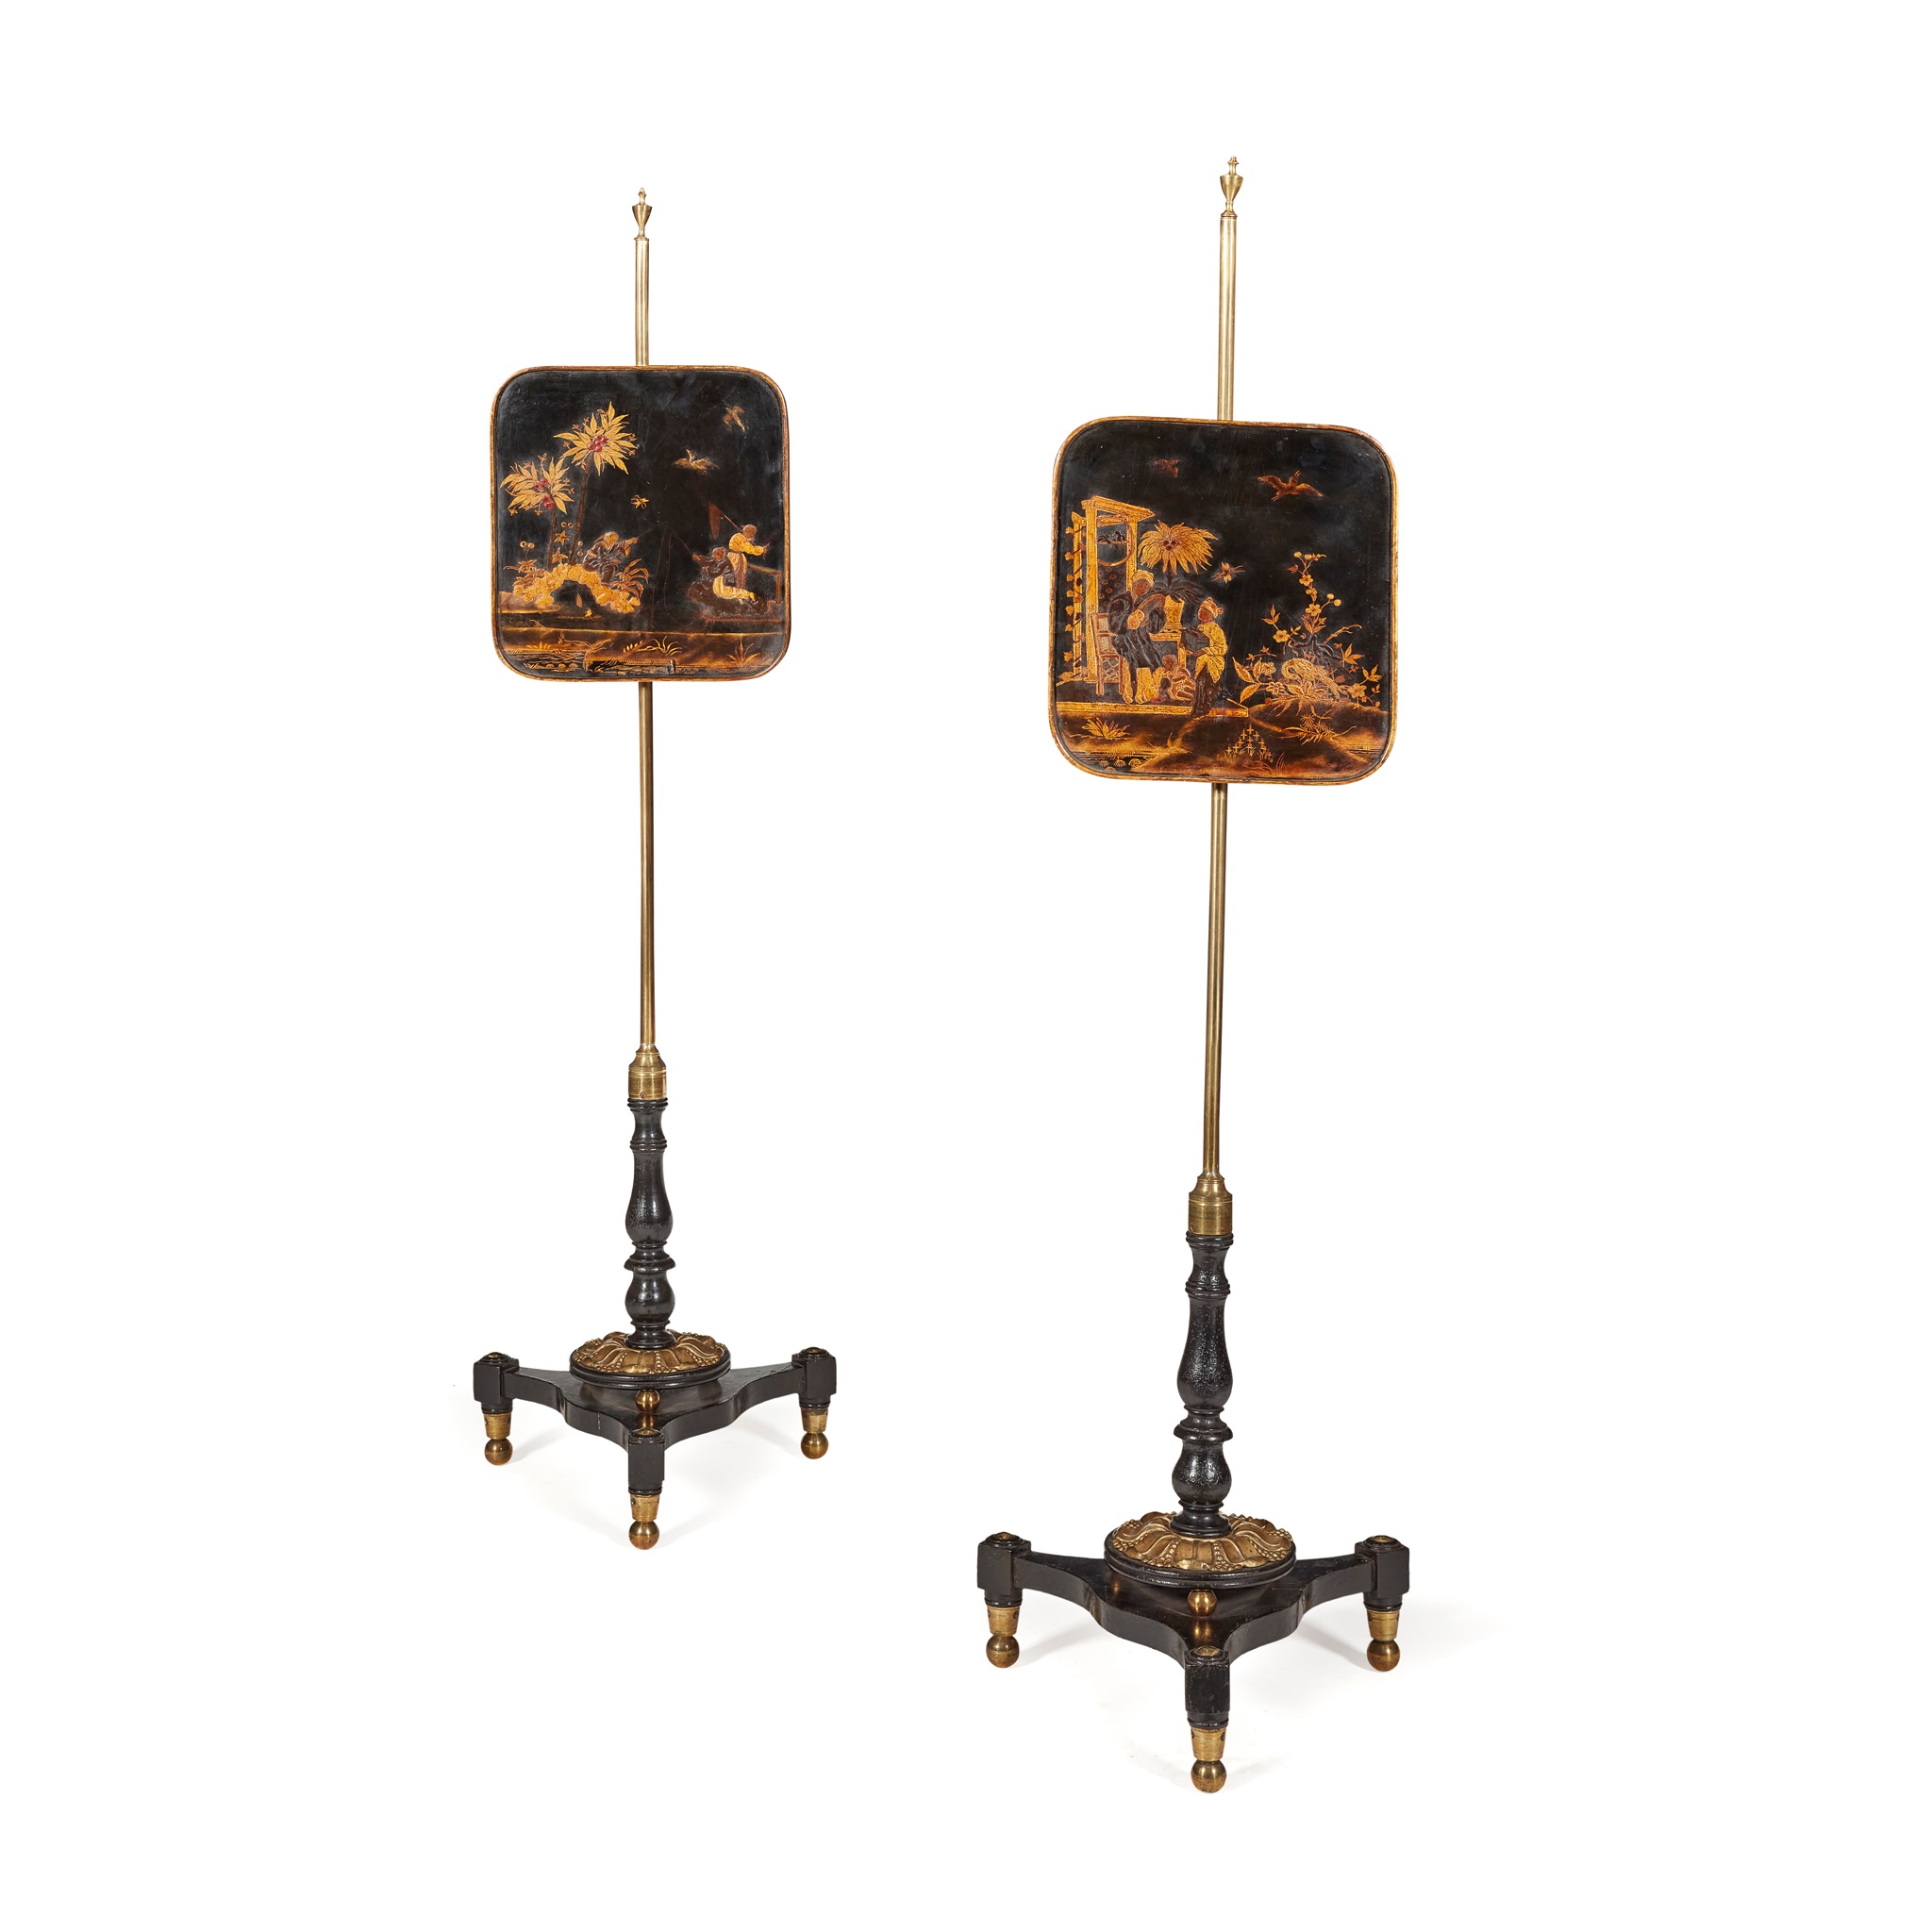 PAIR OF REGENCY LACQUER, EBONISED AND BRASS MOUNTED POLESCREENS EARLY 19TH CENTURY